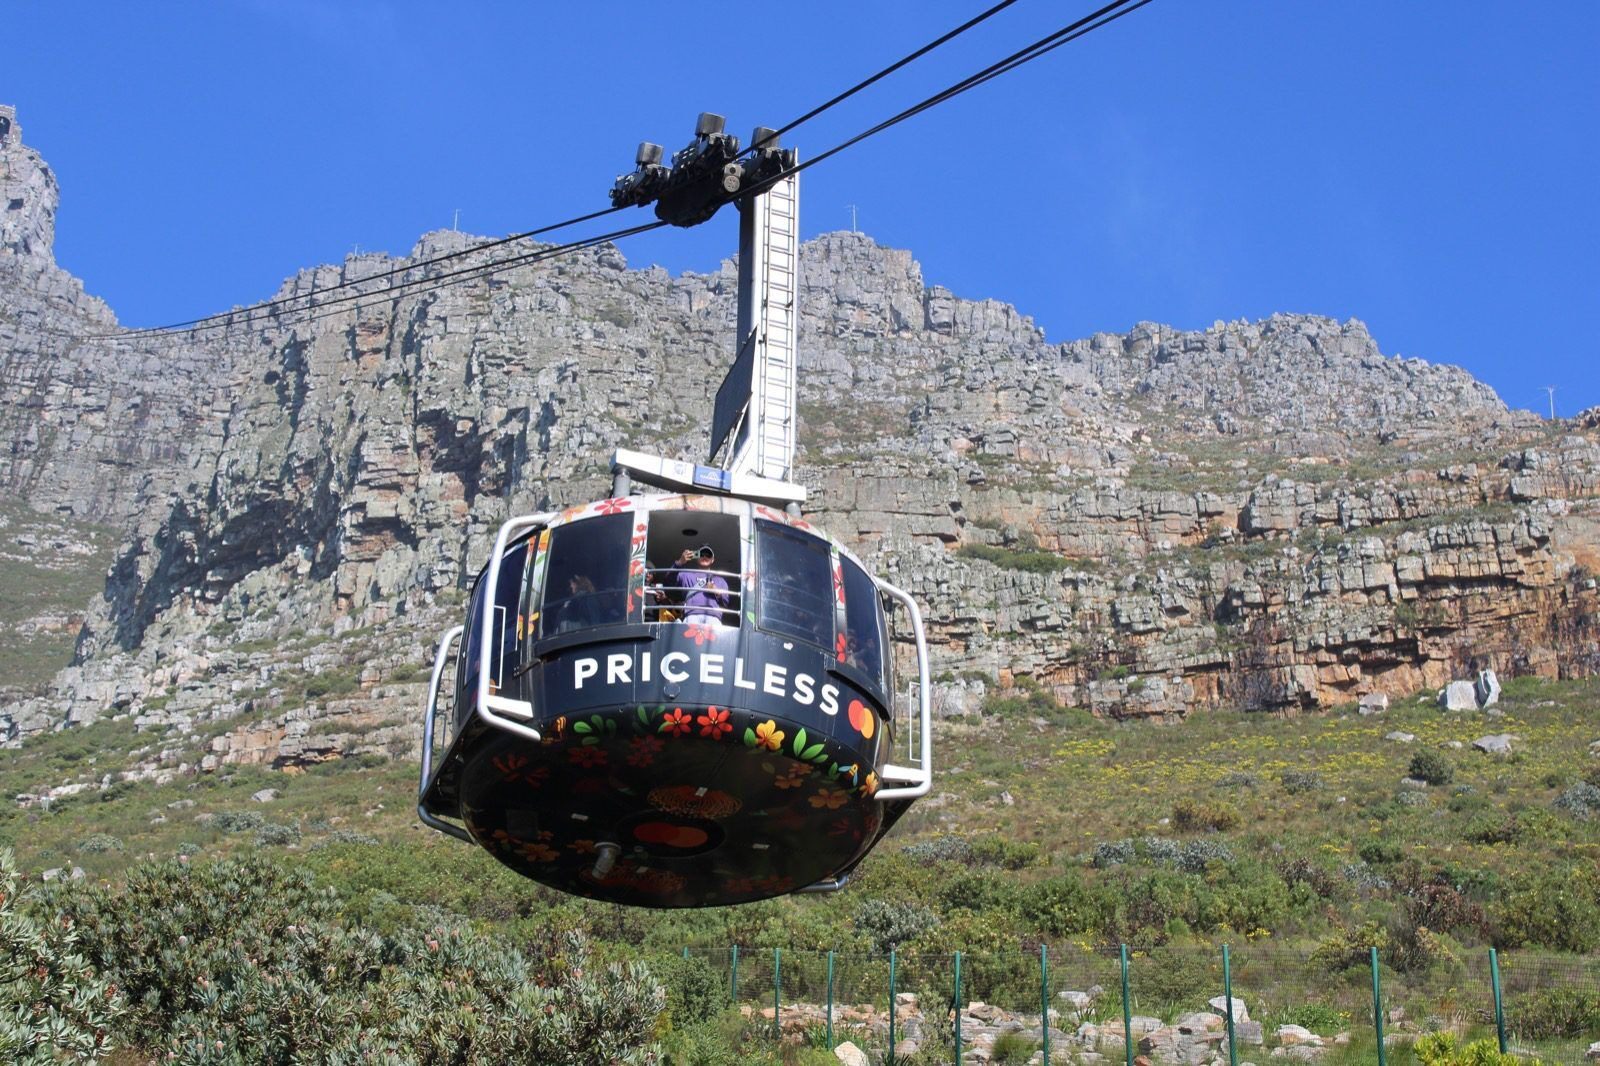 A cable car is going up the mountain side.